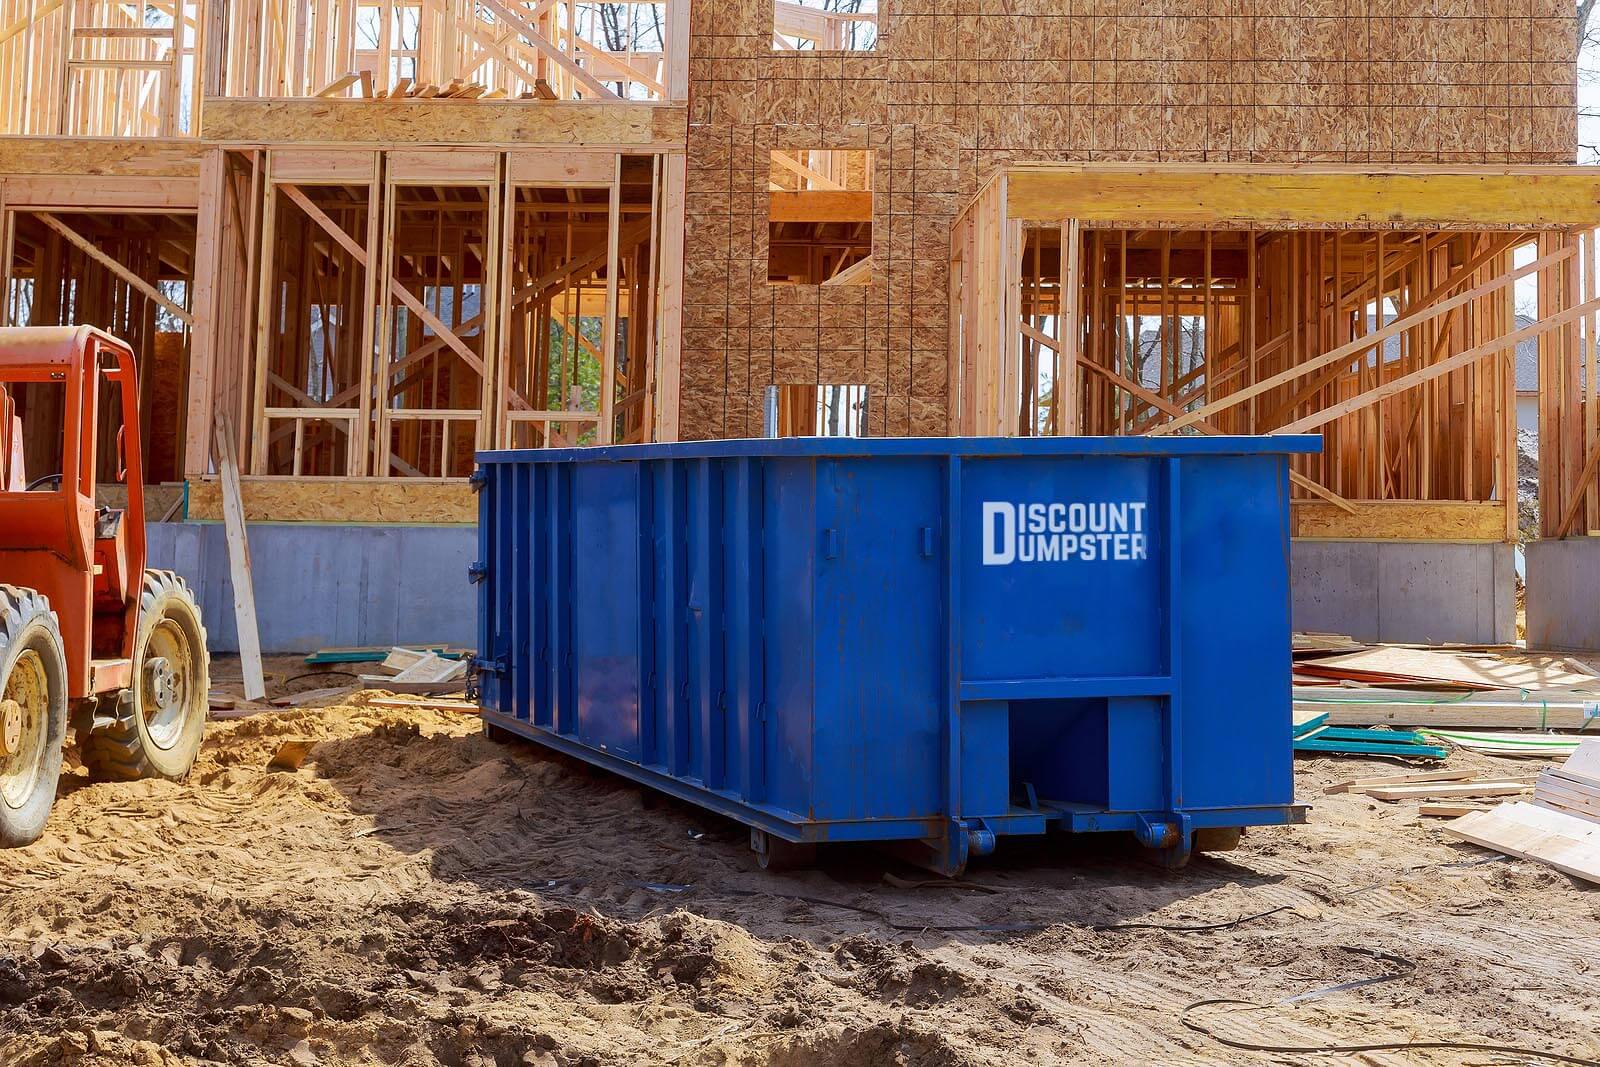 Discount dumpster handles the waste removal at your next home renovation without hassle in the chicago area